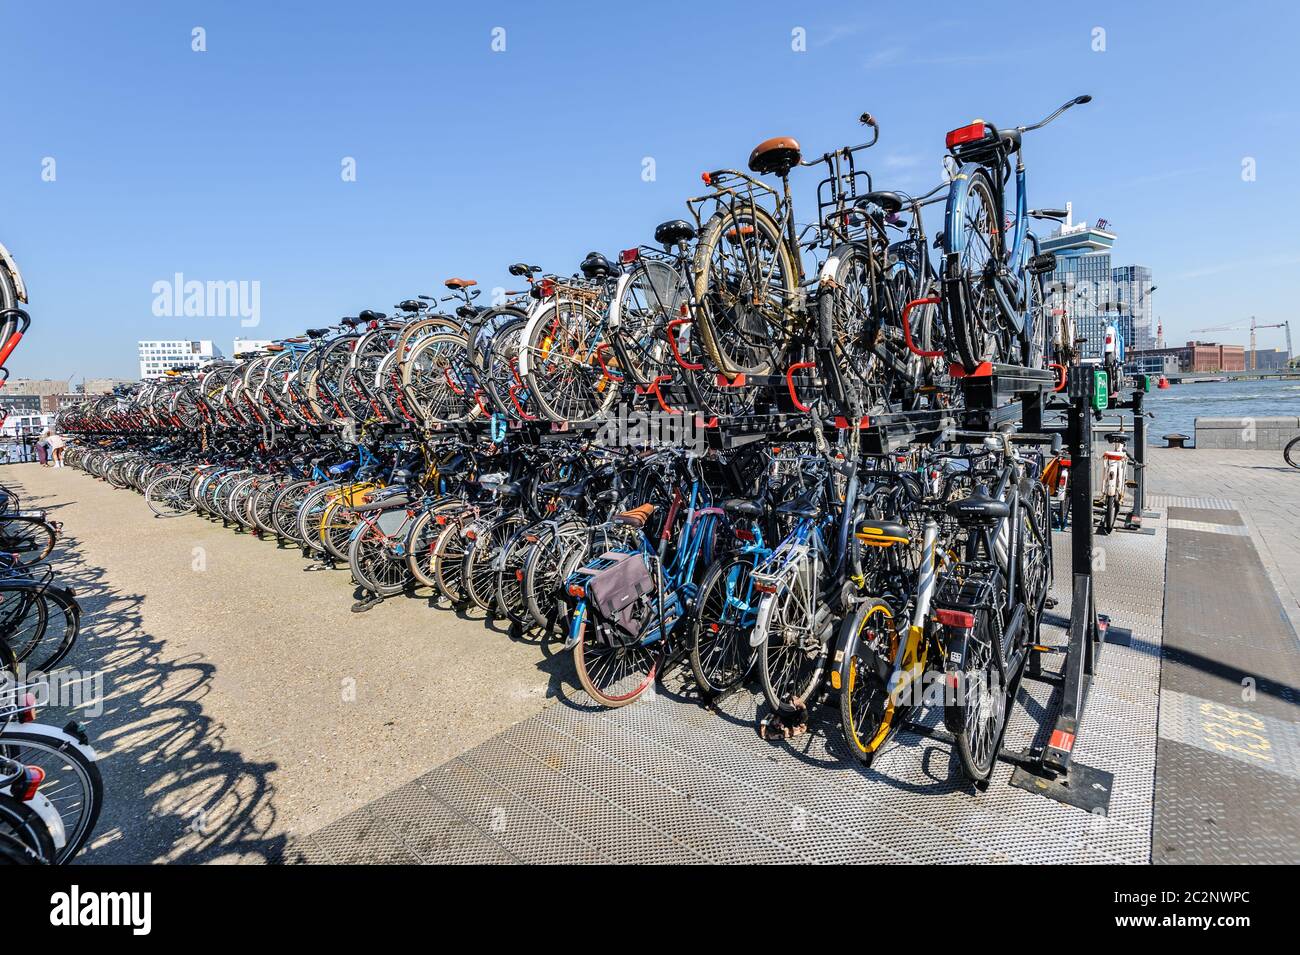 AMSTERDAM, HOLLAND - AUGUST 01: Amsterdam Central station. Many bicycles parked in front of the Central station on August 01, 20 Stock Photo